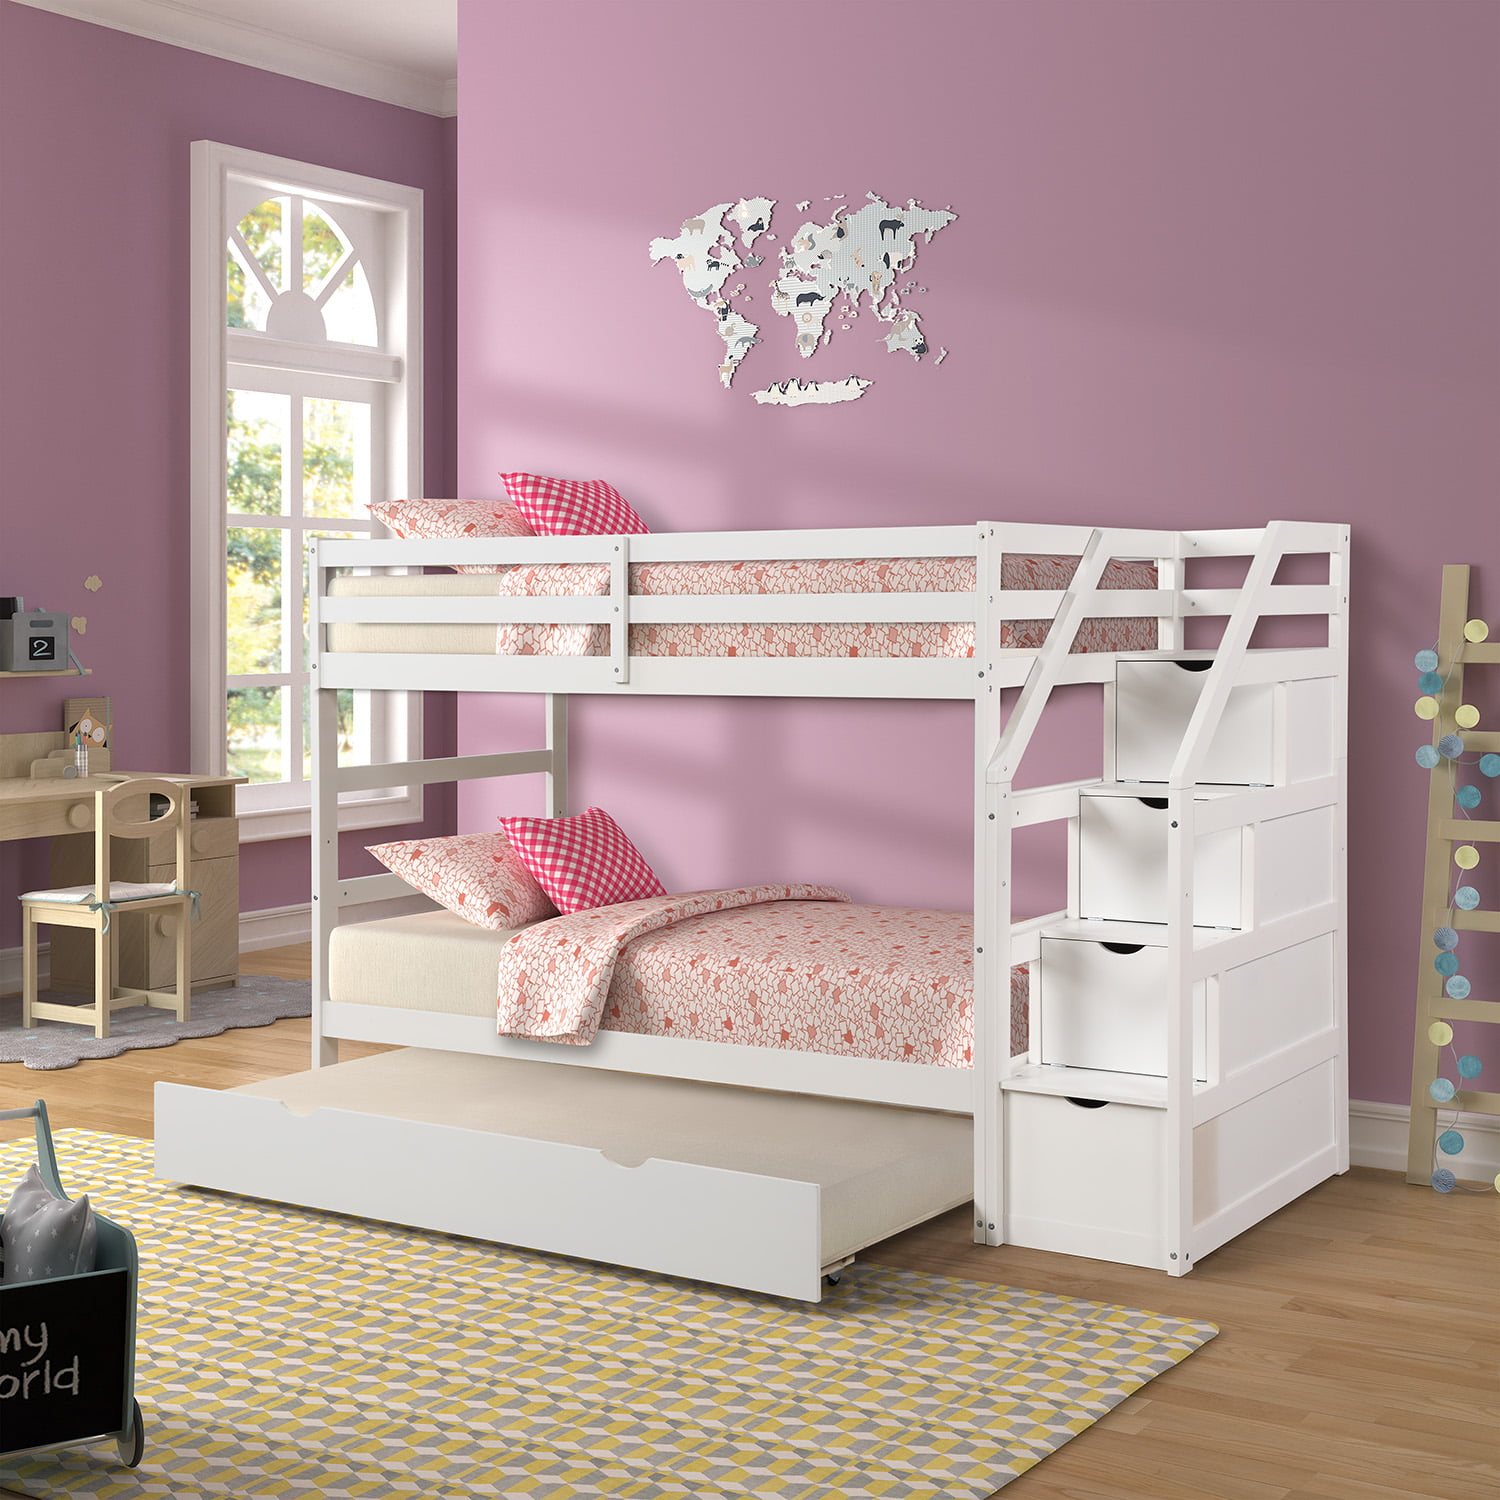 Twin Over Twin Bunk Beds for 3-12 Kids, 94.4'' x 42.4'' x 61.4'' Solid